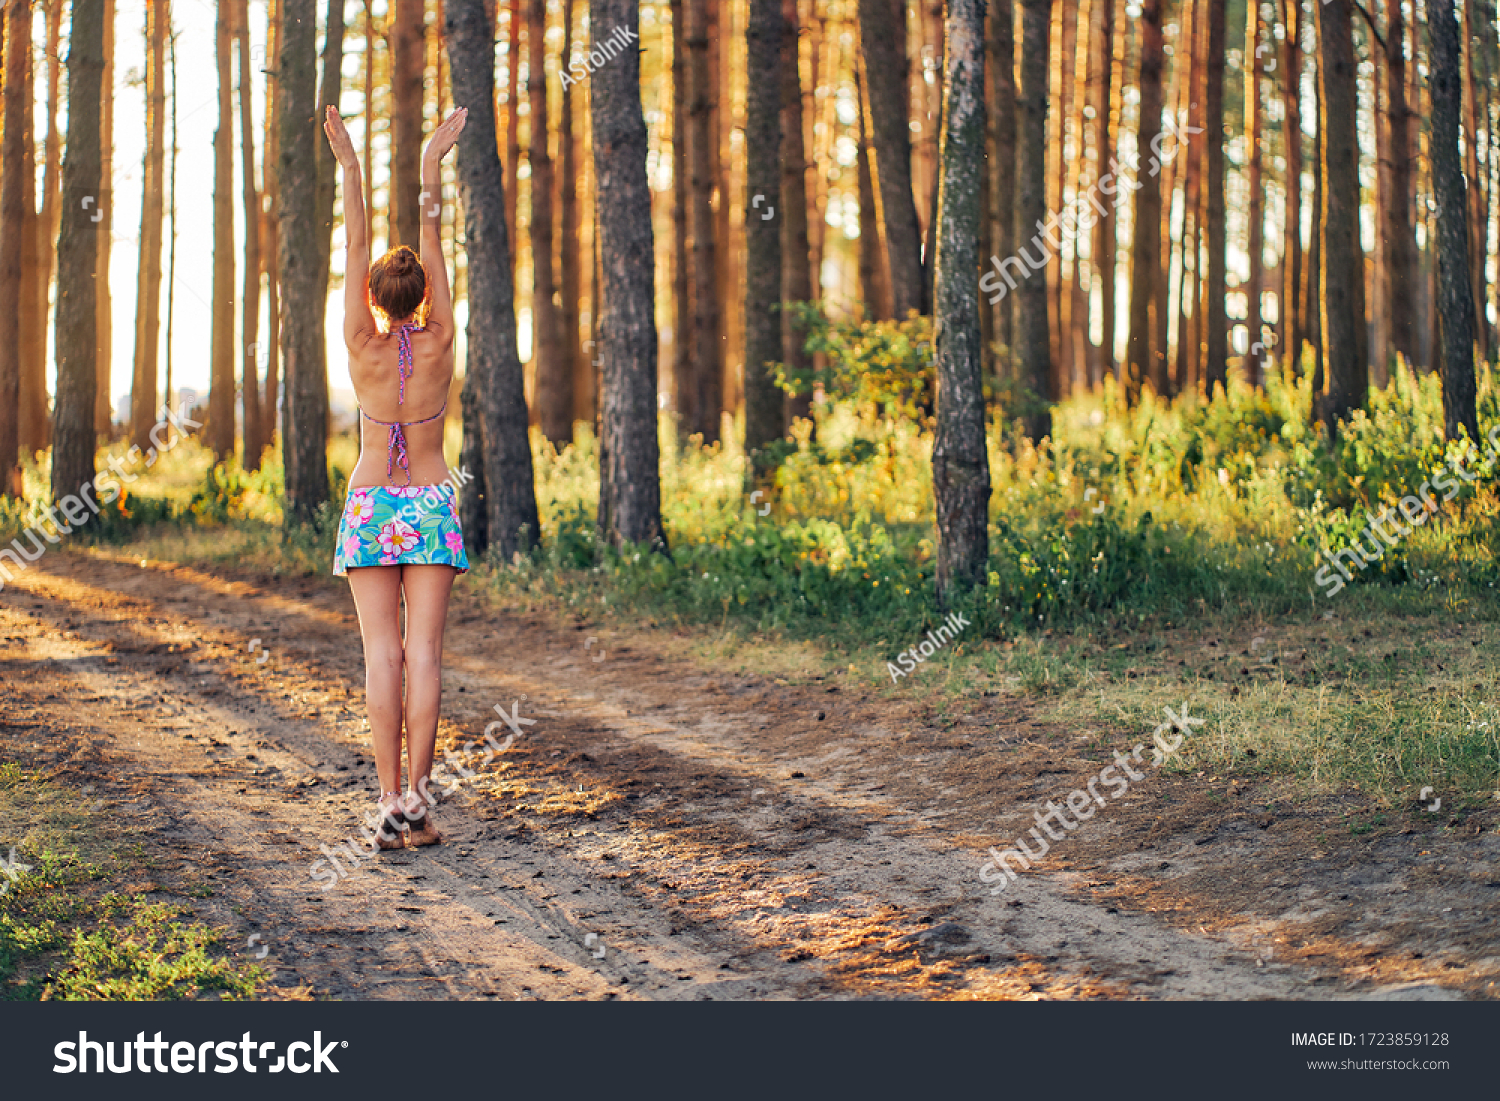 https://image.shutterstock.com/z/stock-photo-woman-in-swimsuit-and-sport-skirt-pulls-hands-to-the-sun-1723859128.jpg